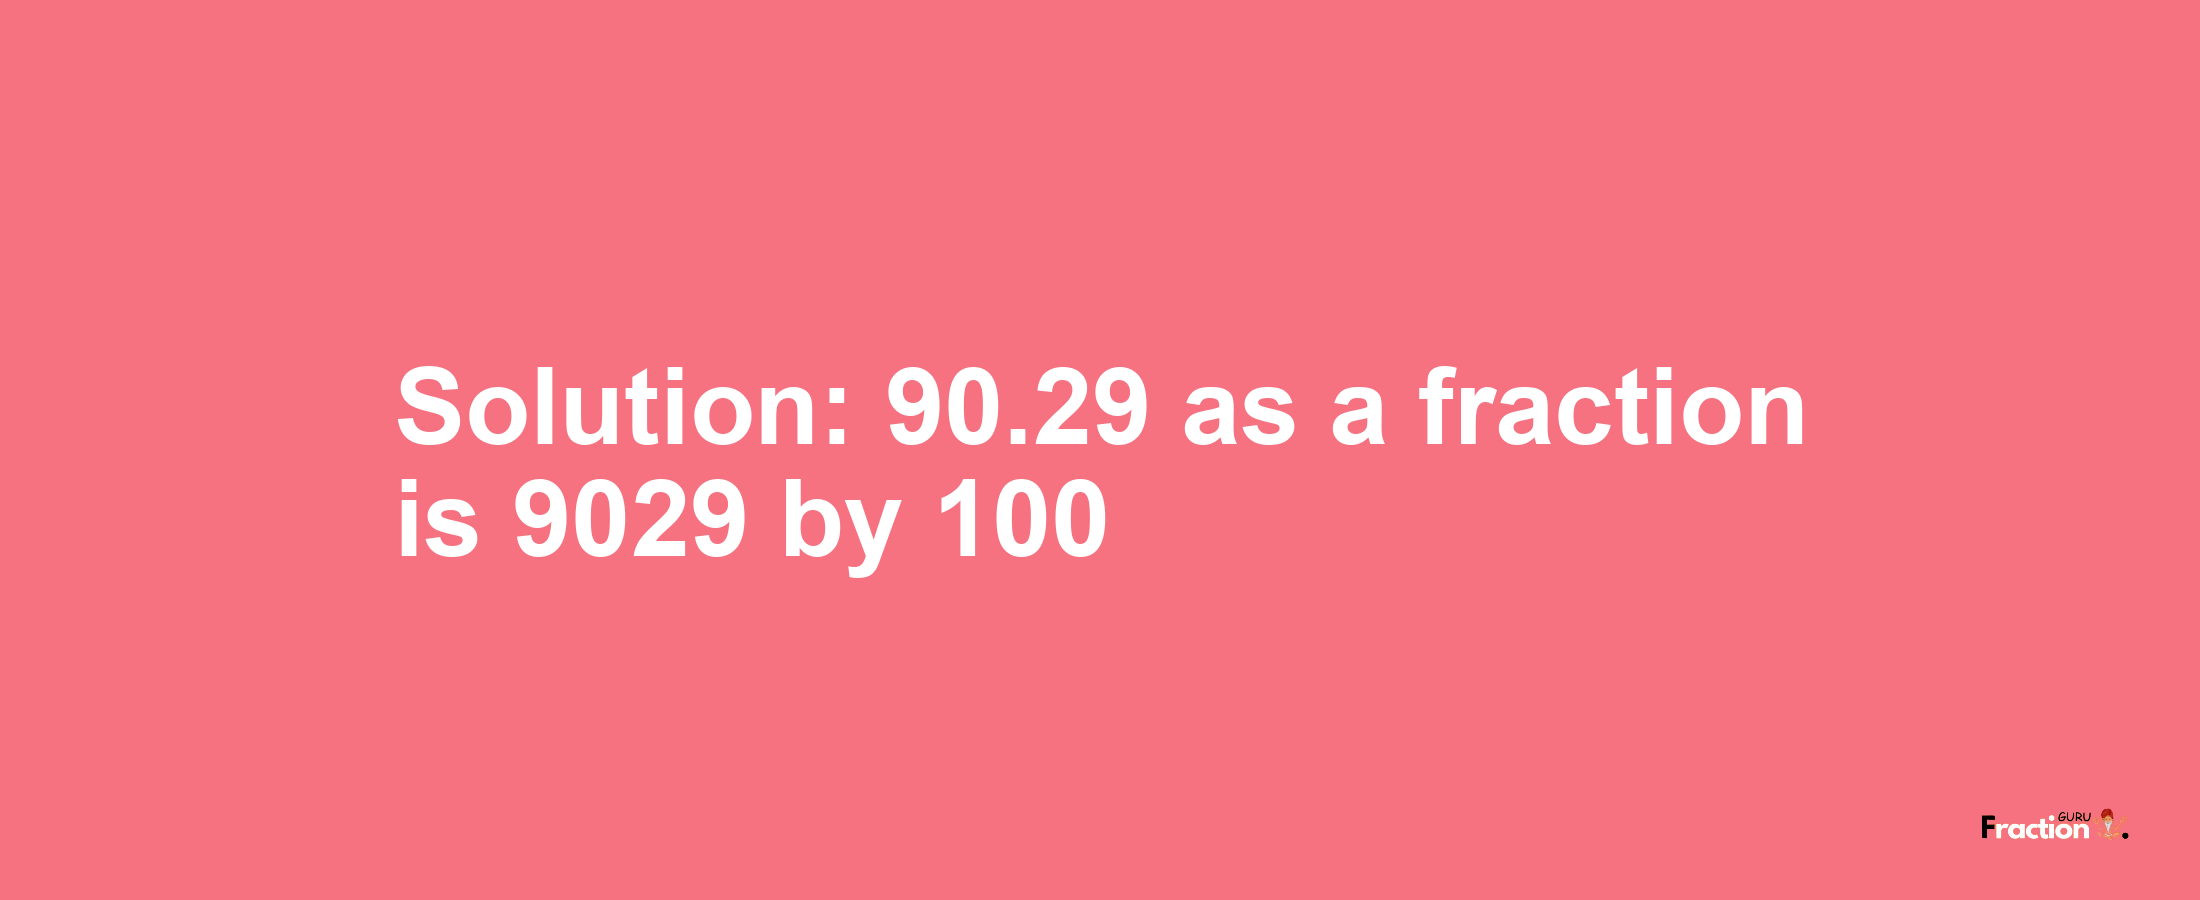 Solution:90.29 as a fraction is 9029/100